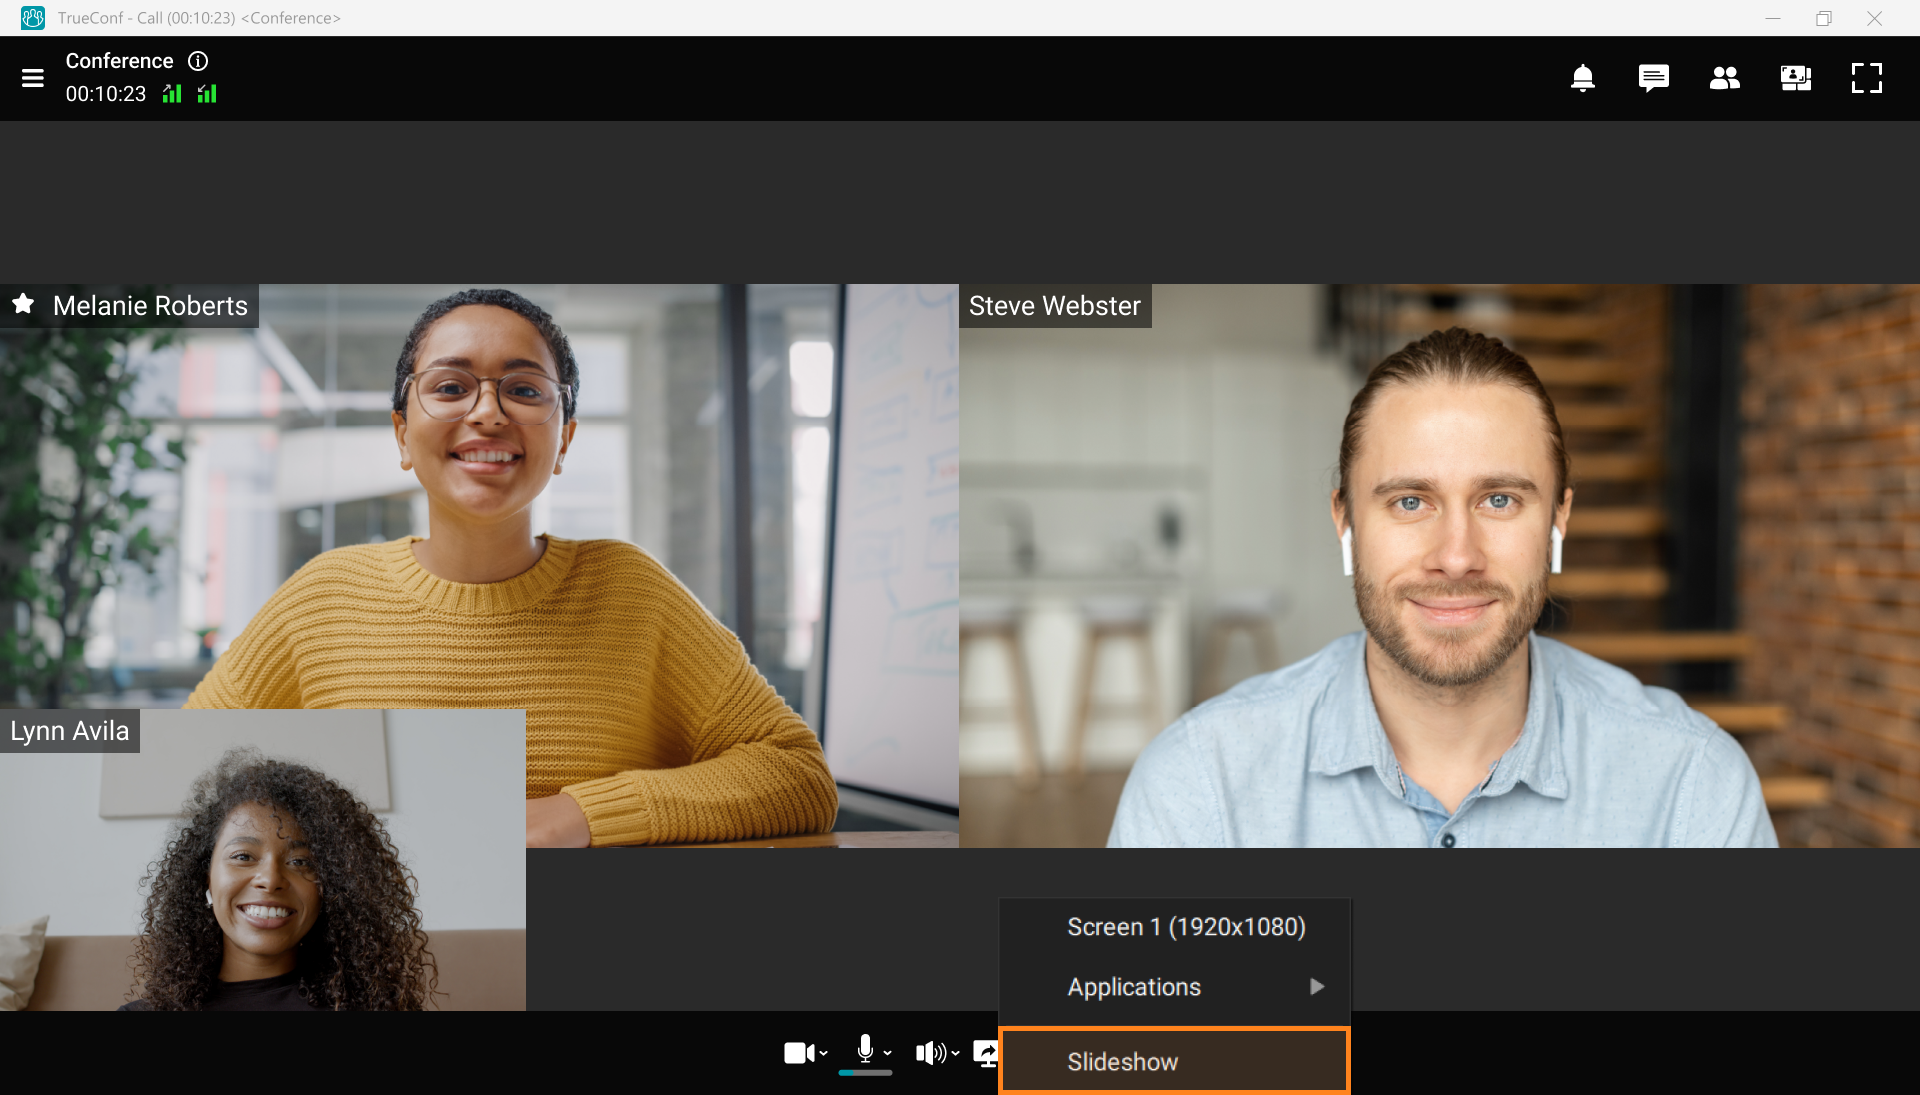 TrueConf 8.1 for Windows: Enhanced team messaging, media player for recordings, and automatic content spotlight 16